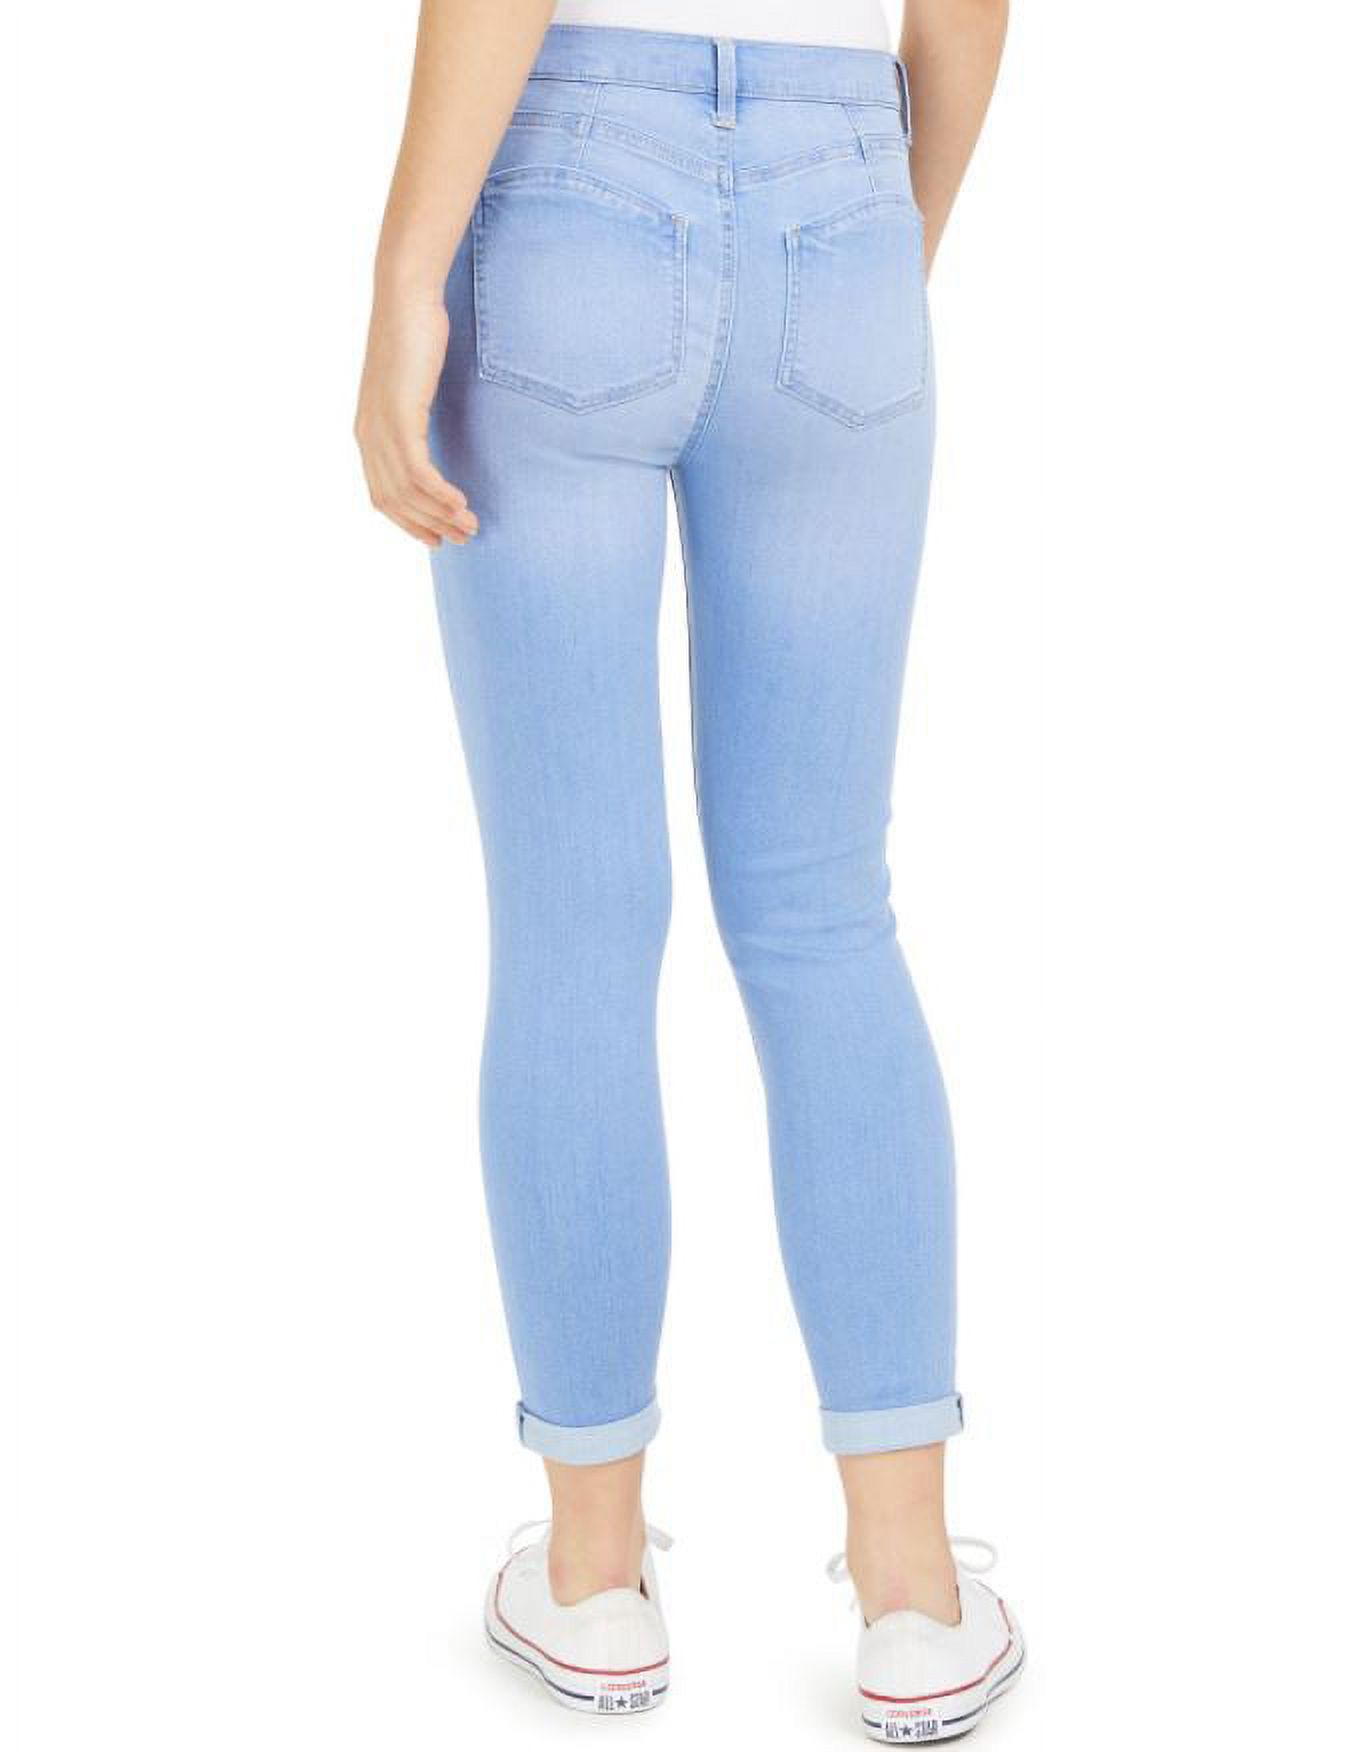 Celebrity Pink Girl's Blue Curvy Cuffed High-Rise Cropped Jeans, 0/24 - image 2 of 5